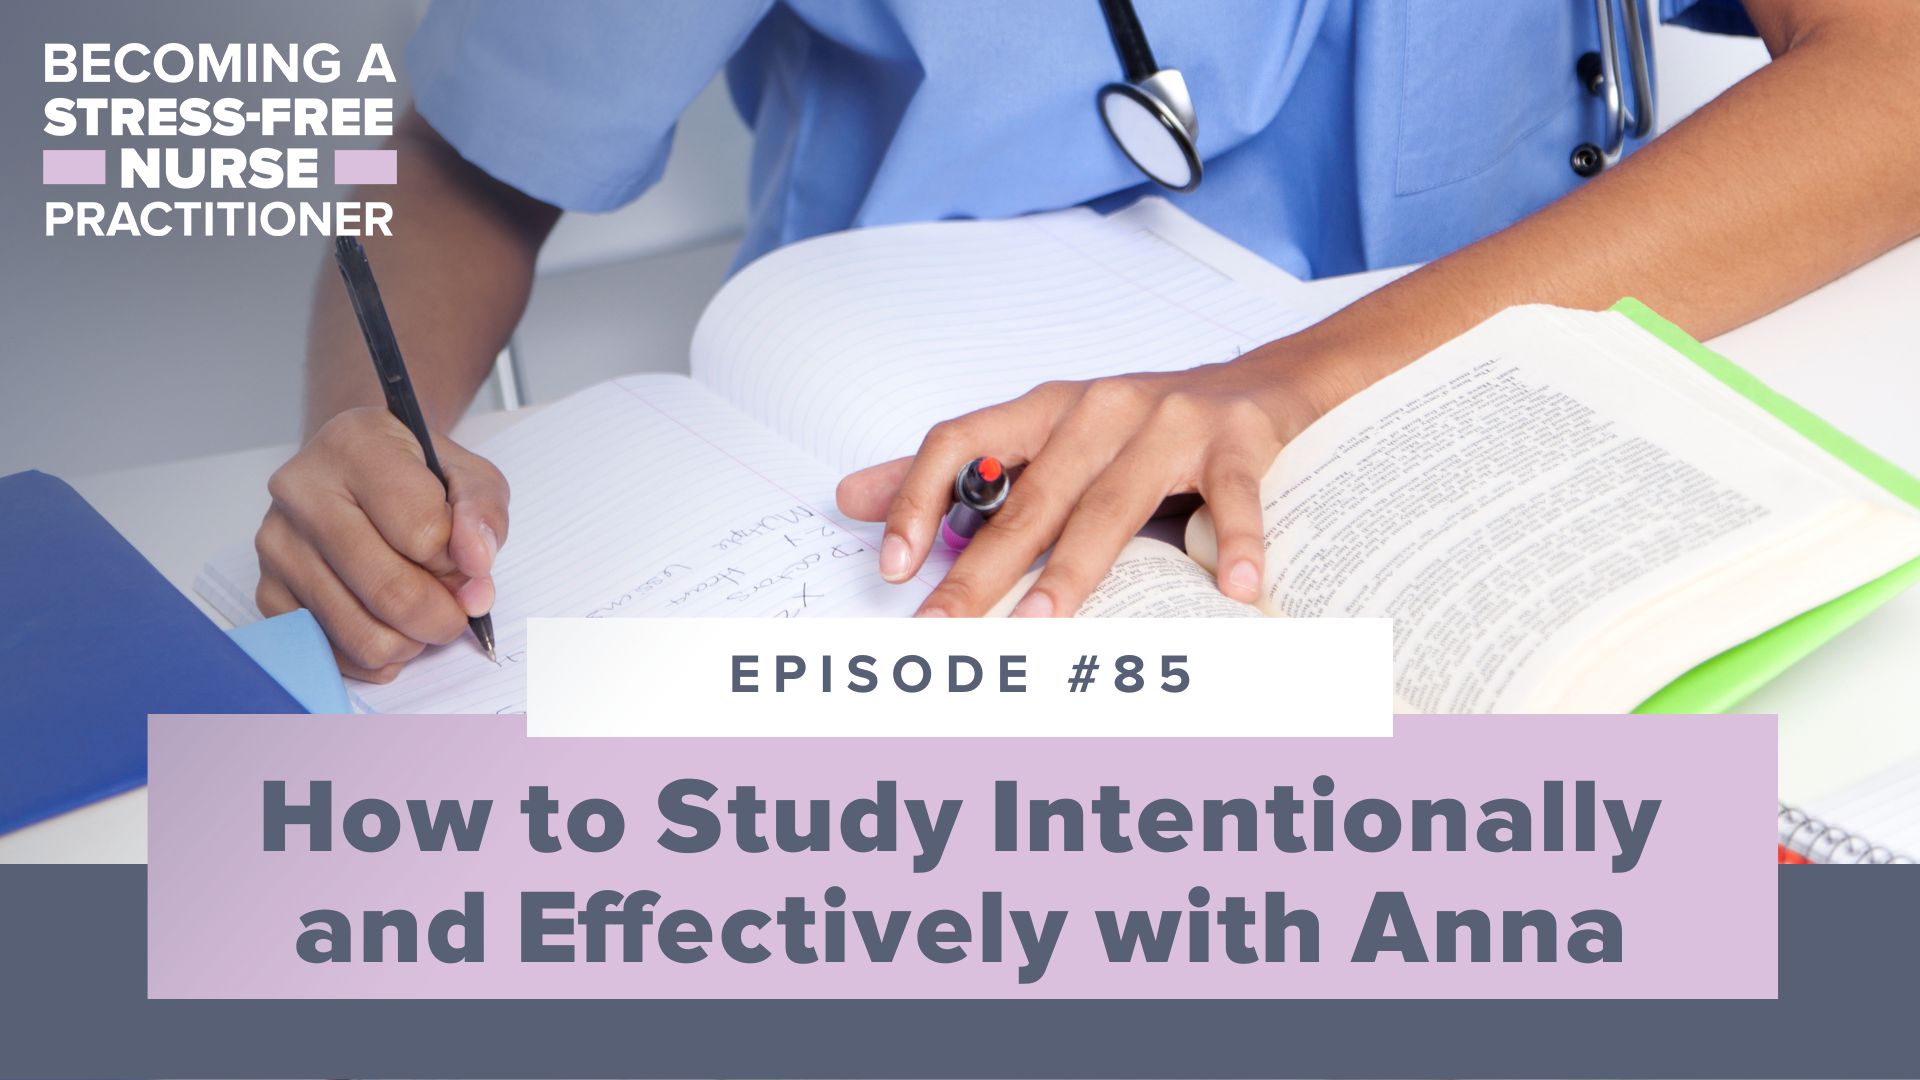 Ep #85: How to Study Intentionally and Effectively with Anna [NP Student]